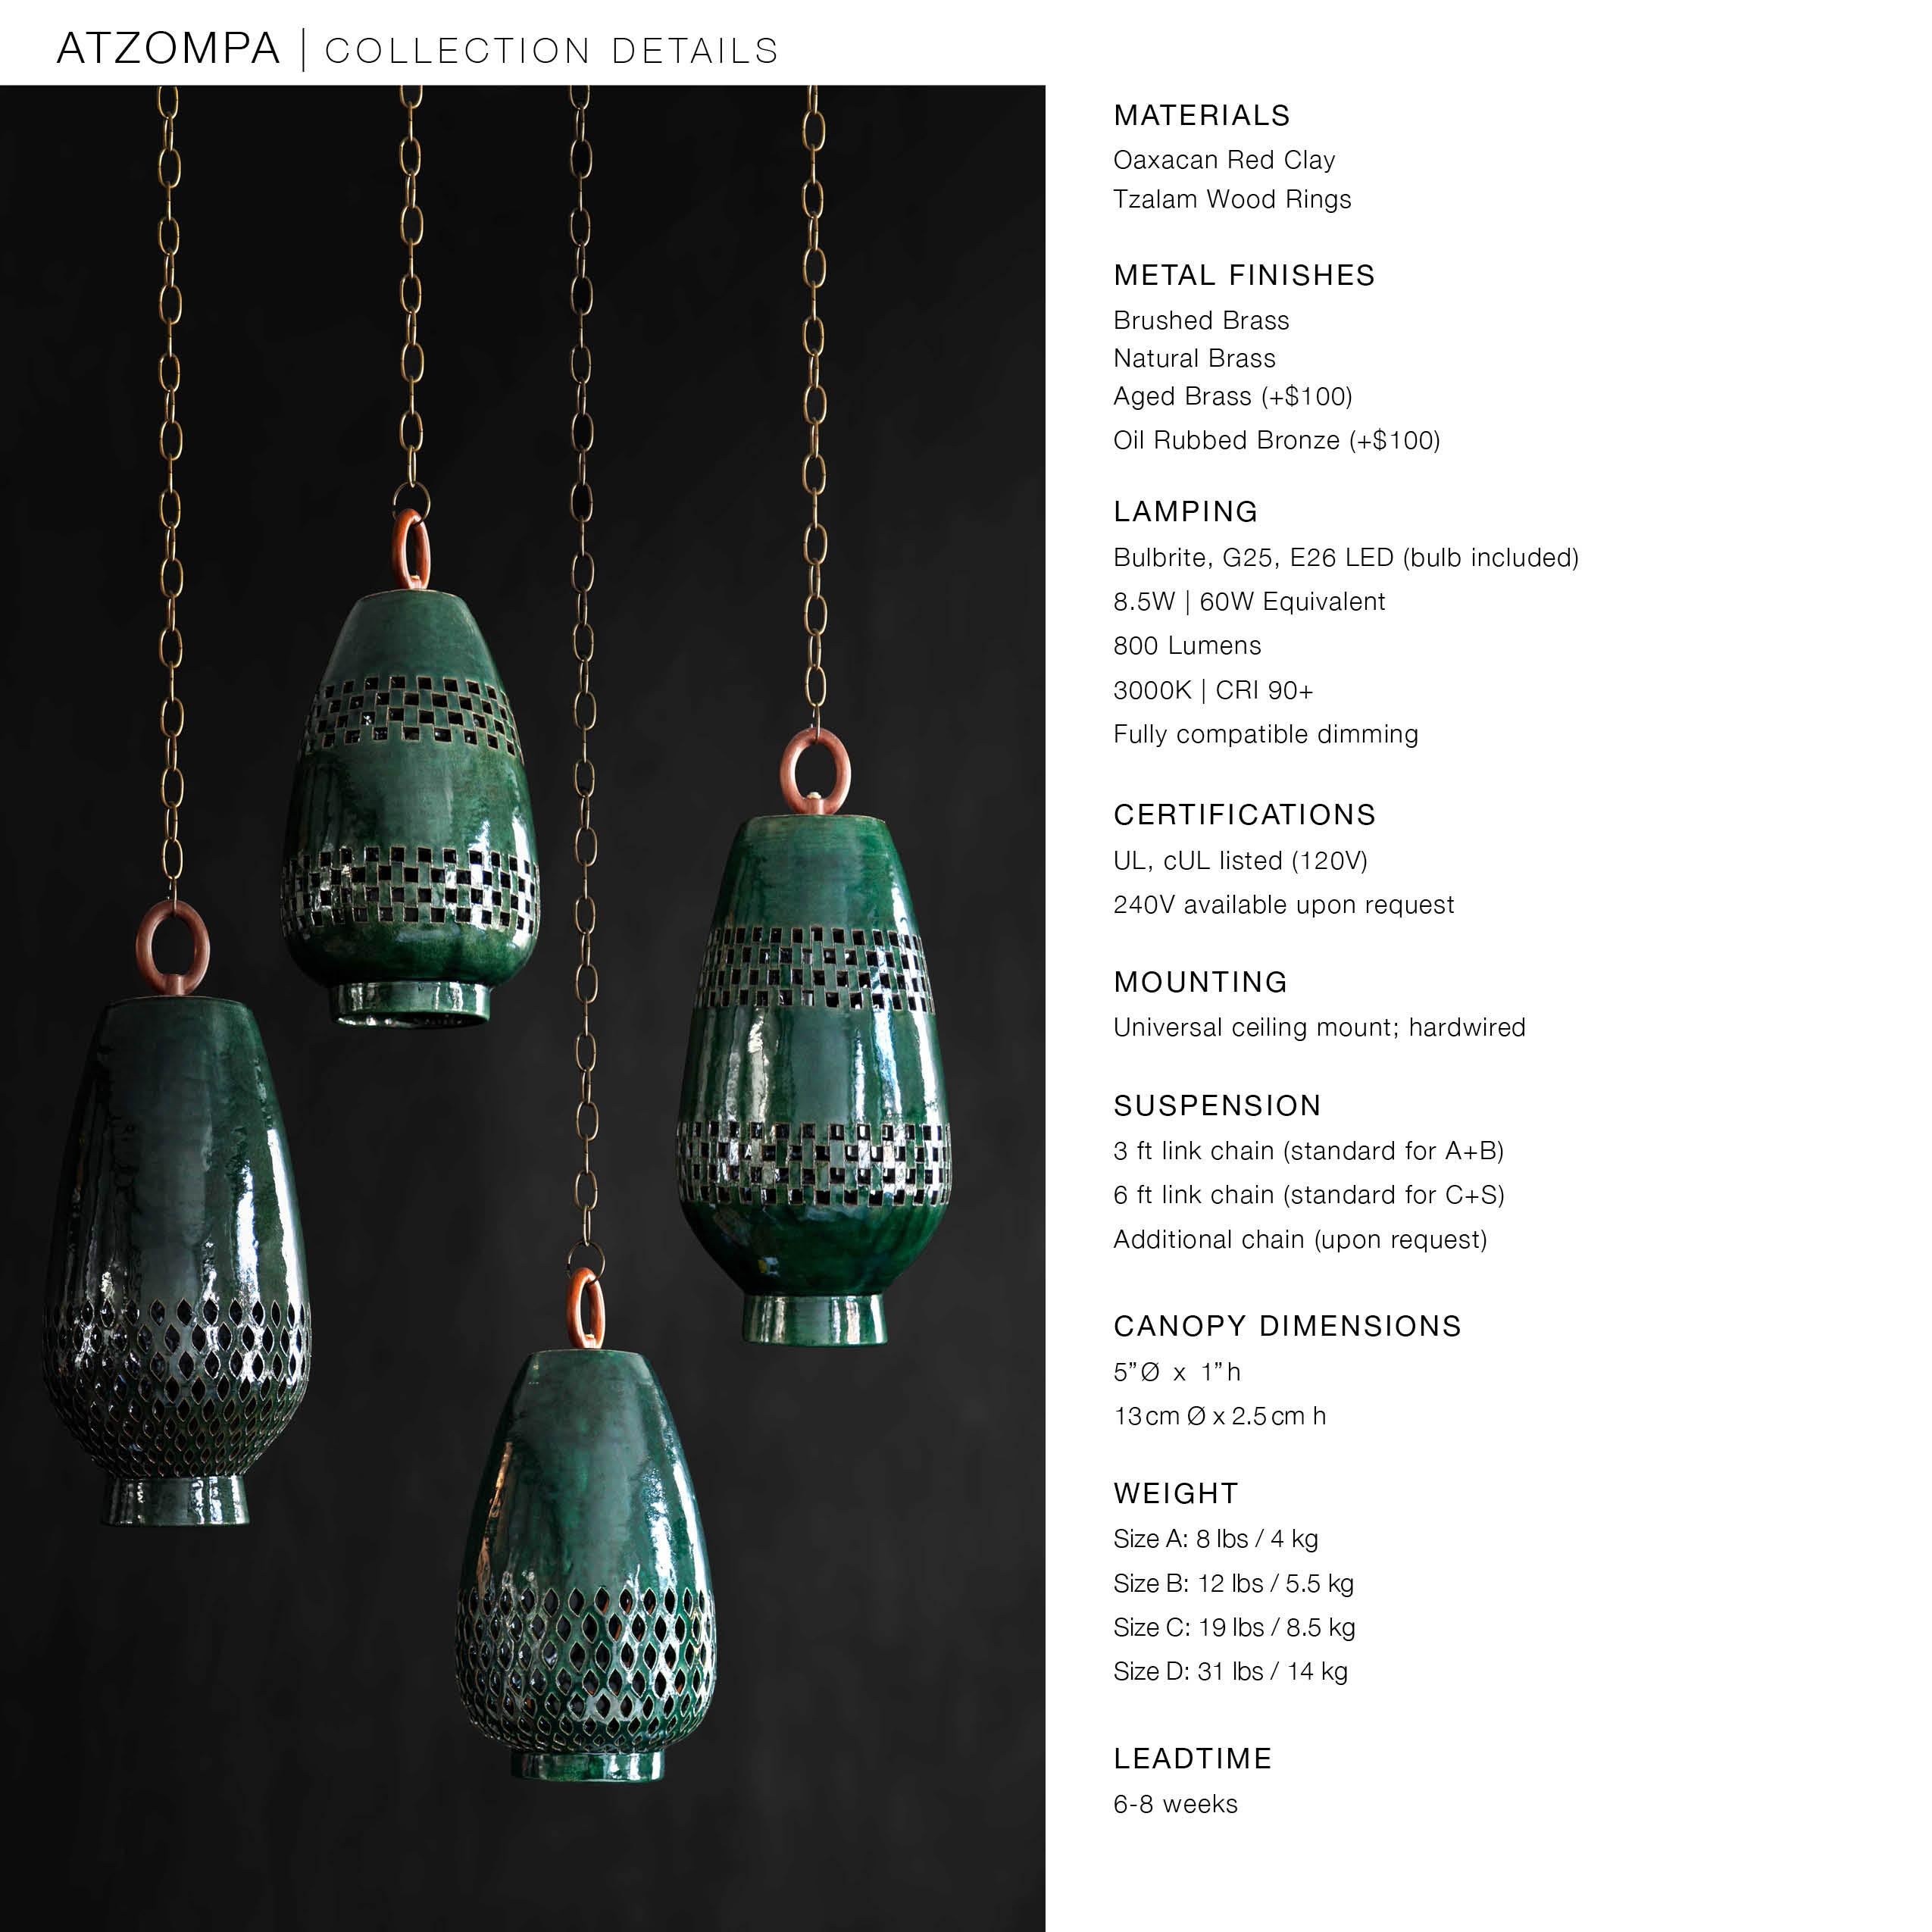 Emerald Ceramic Pendant Light XL, Brushed Brass, Diamantes Atzompa Collection In New Condition For Sale In New York, NY